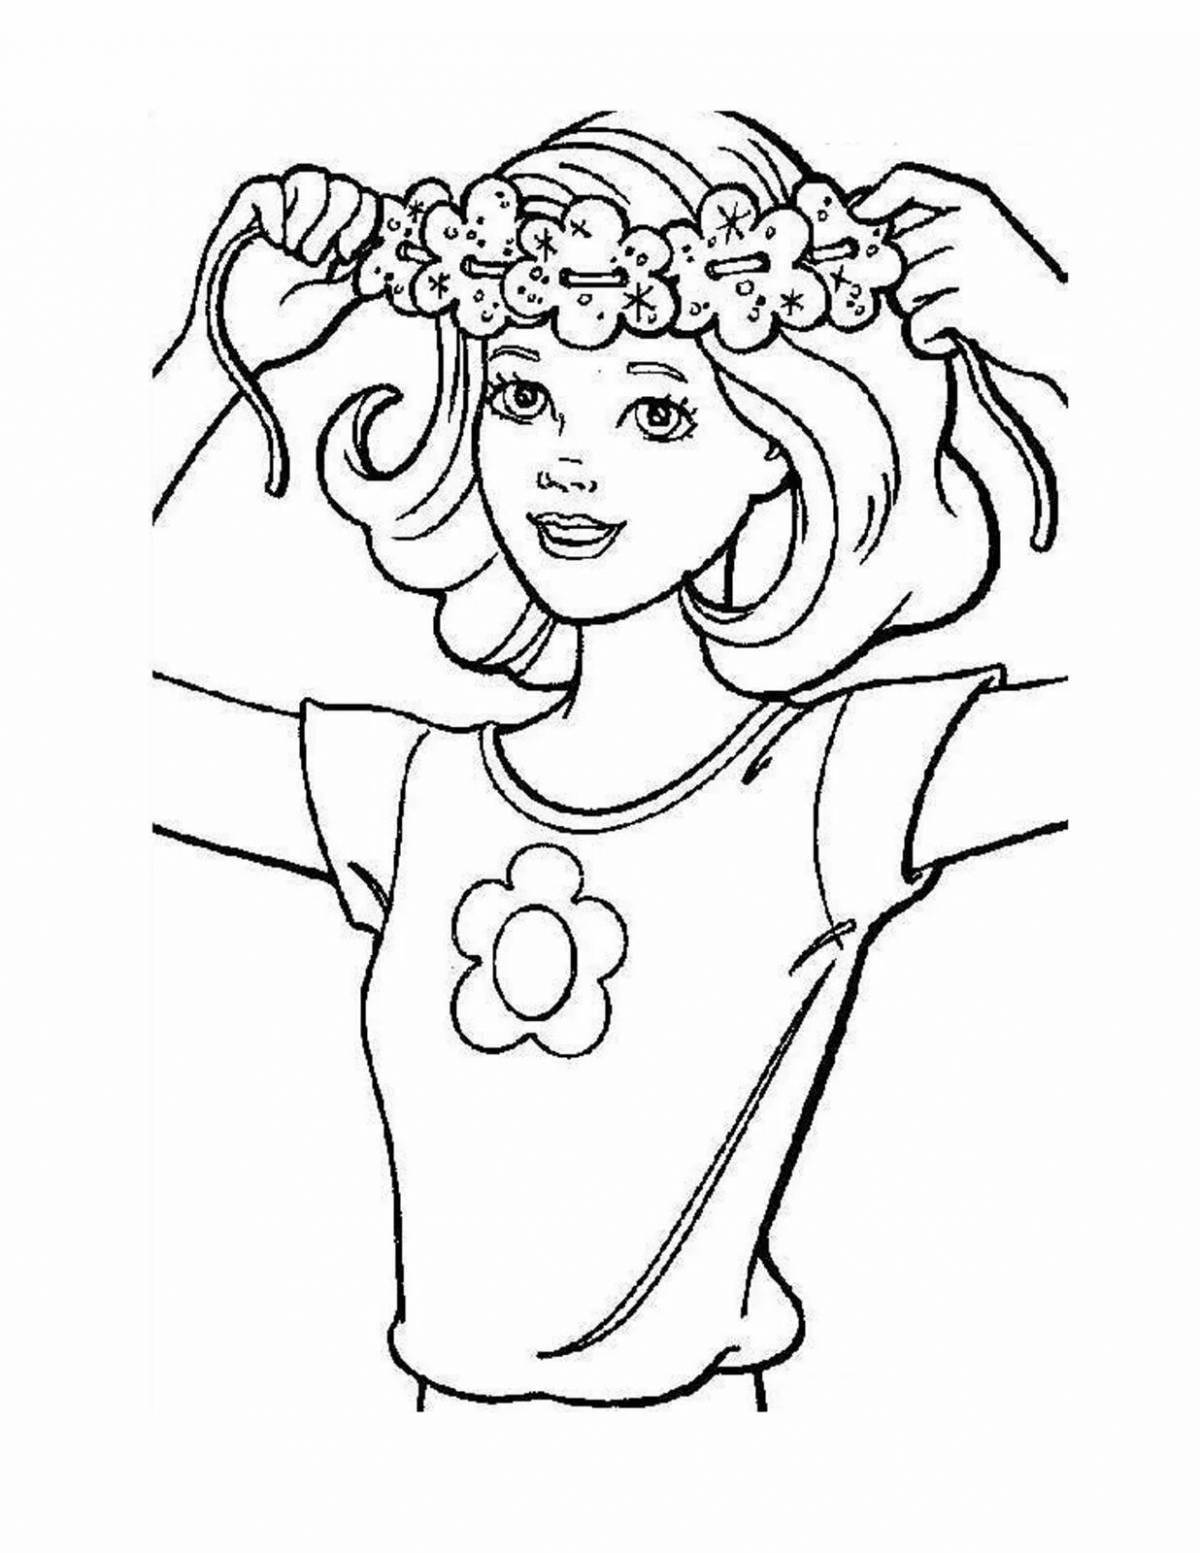 Colourful woman coloring pages for kids